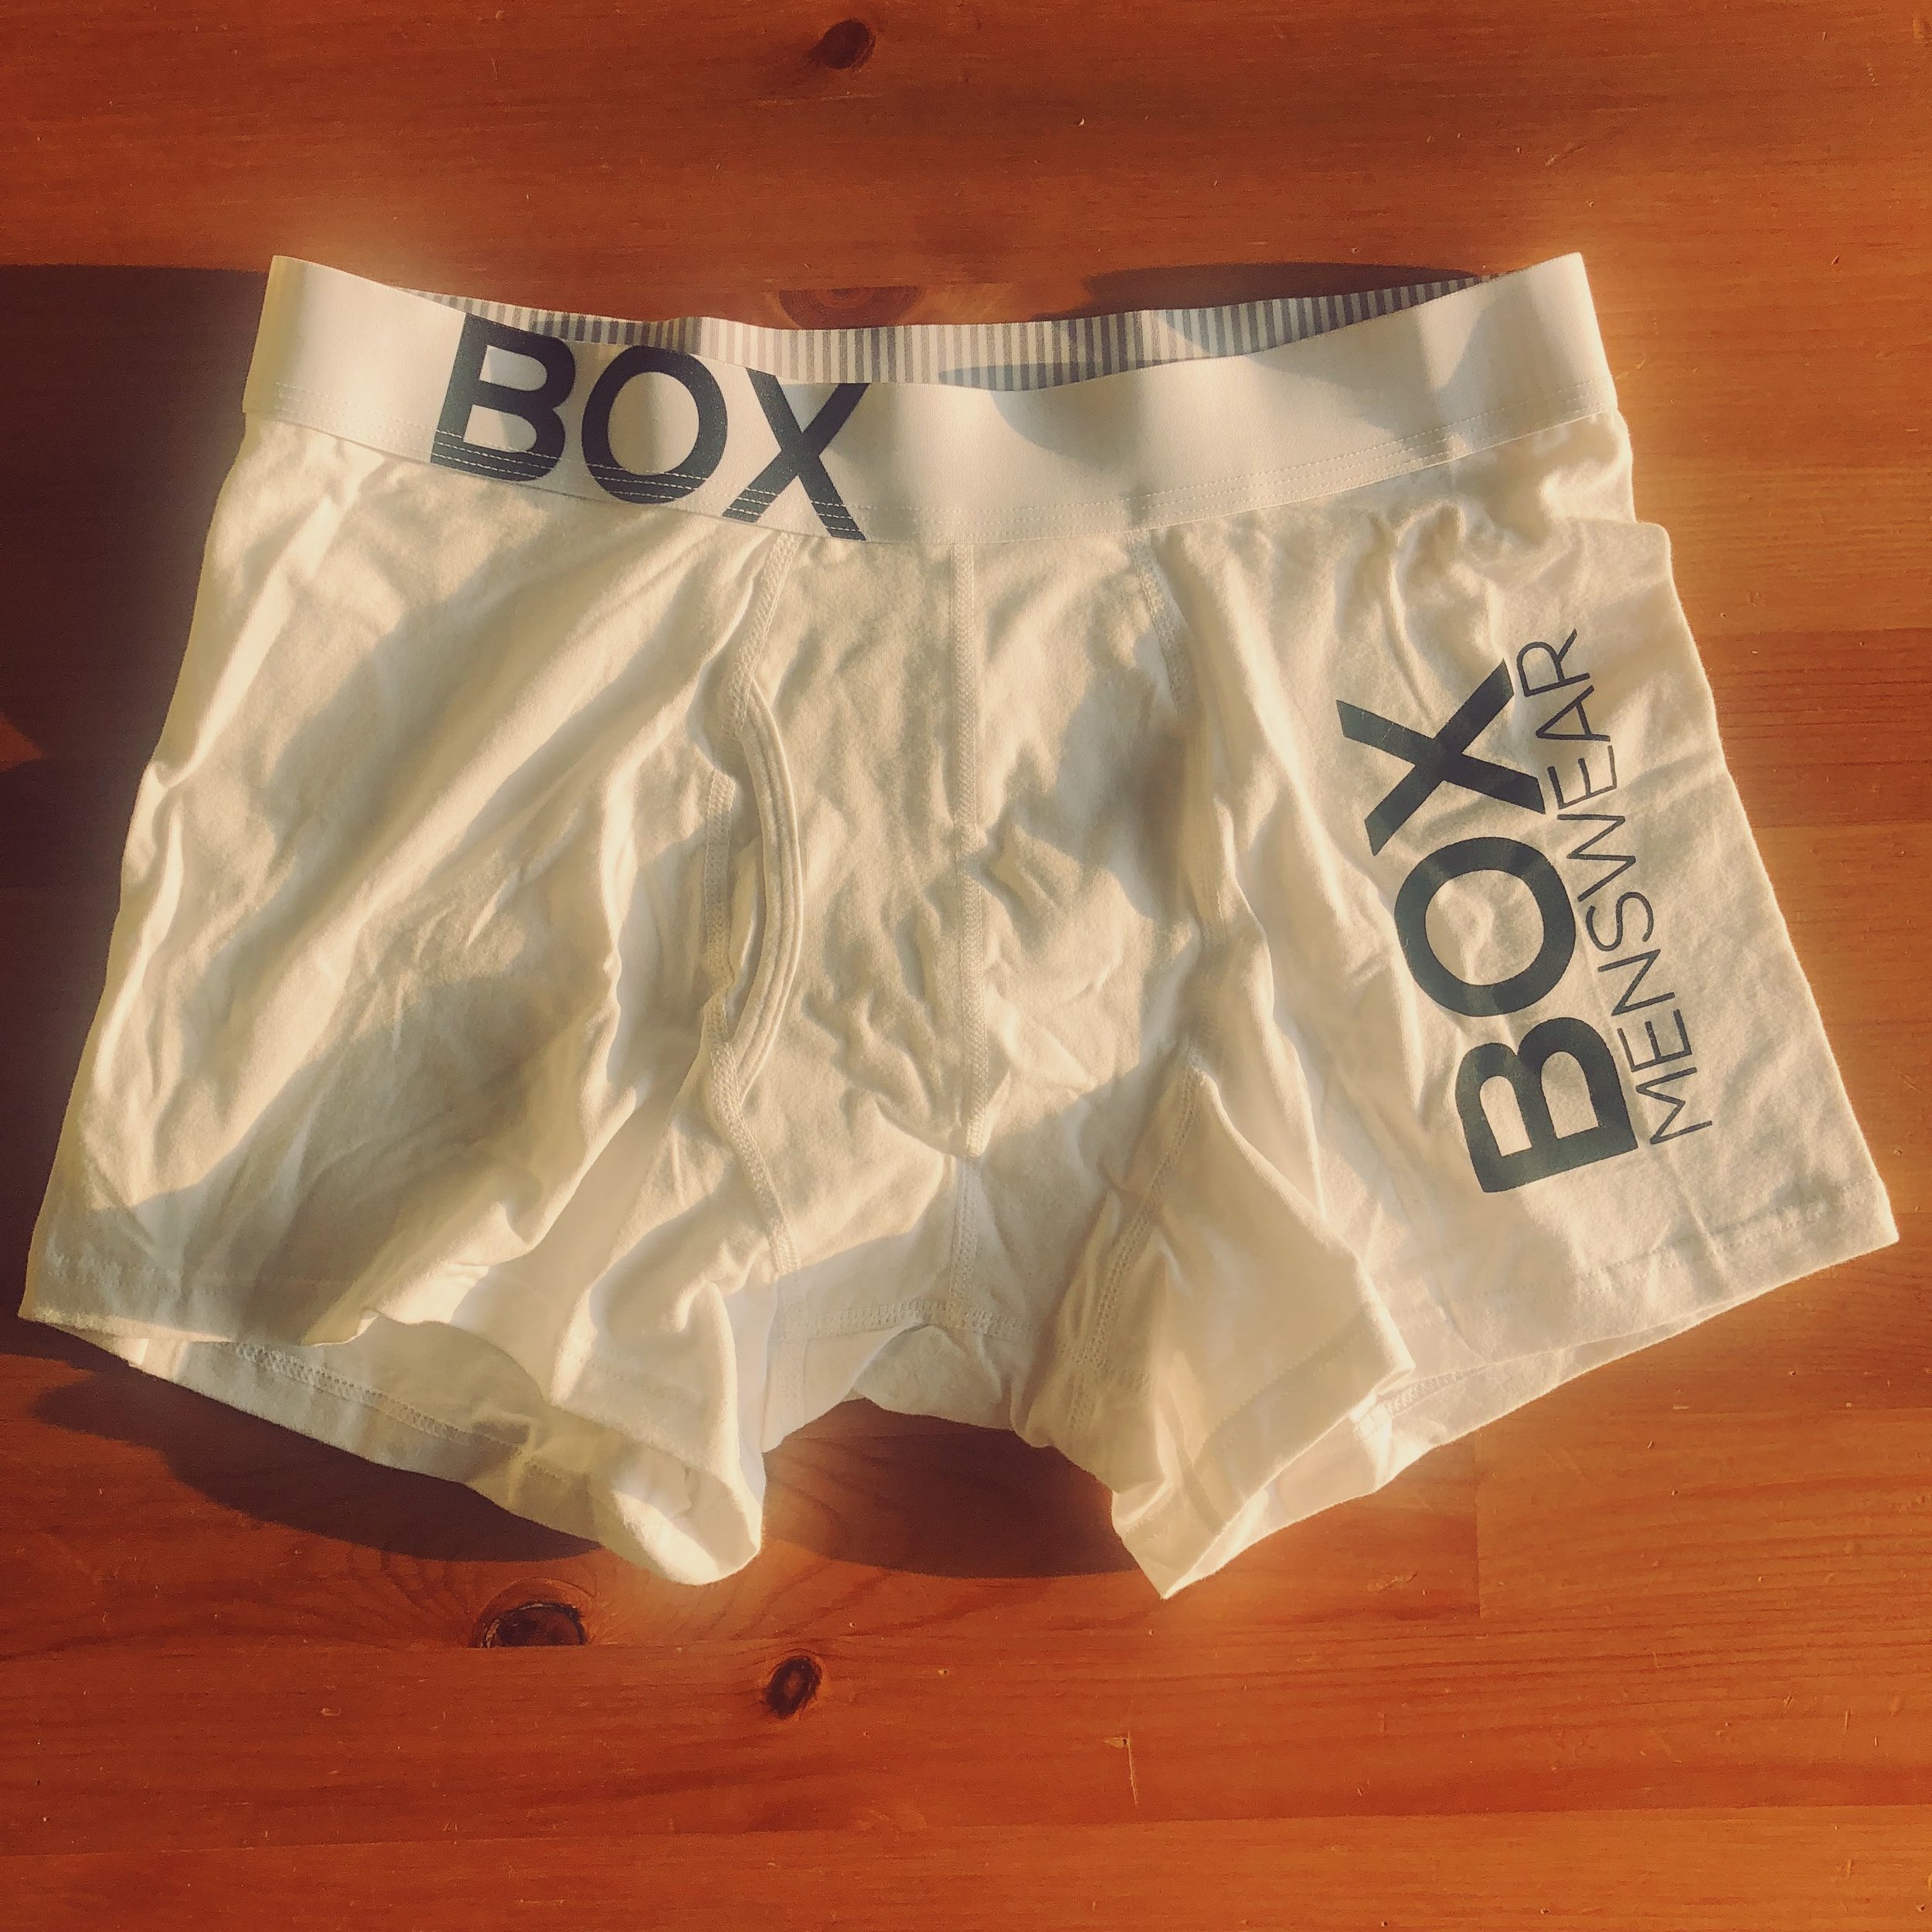 Box Menswear Review. Are Box undies any good? — DAPPER & GROOMED